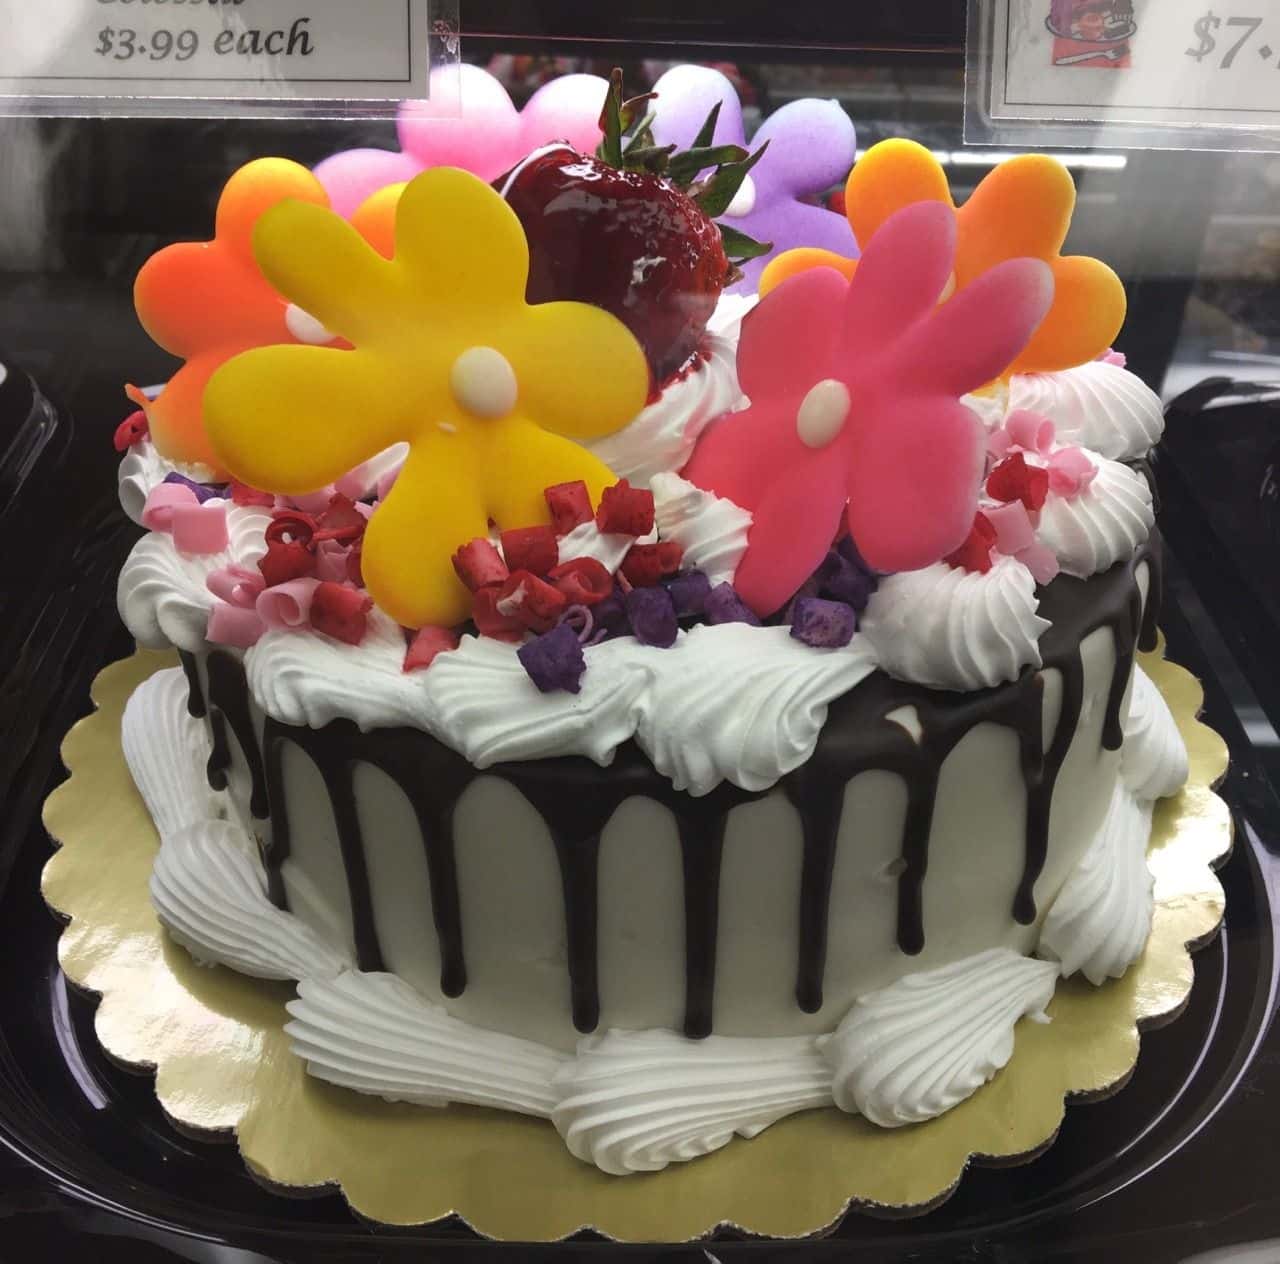 Pictures Of Cakes From Grocery Stores